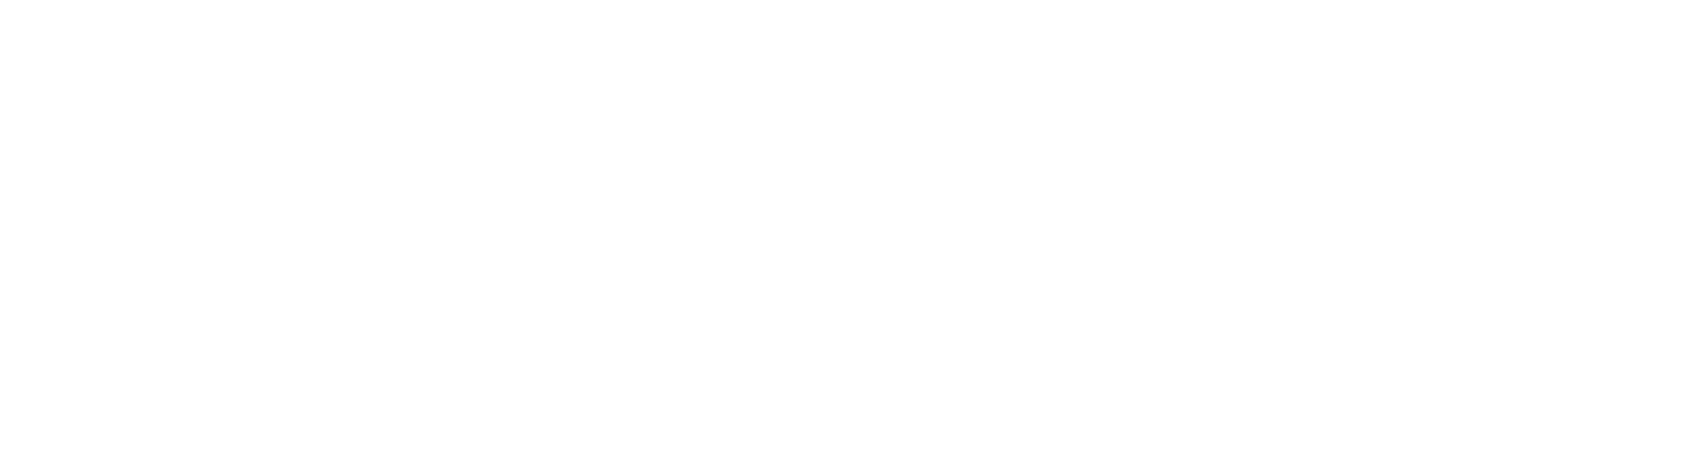 Mainline-Real-Estate-Group